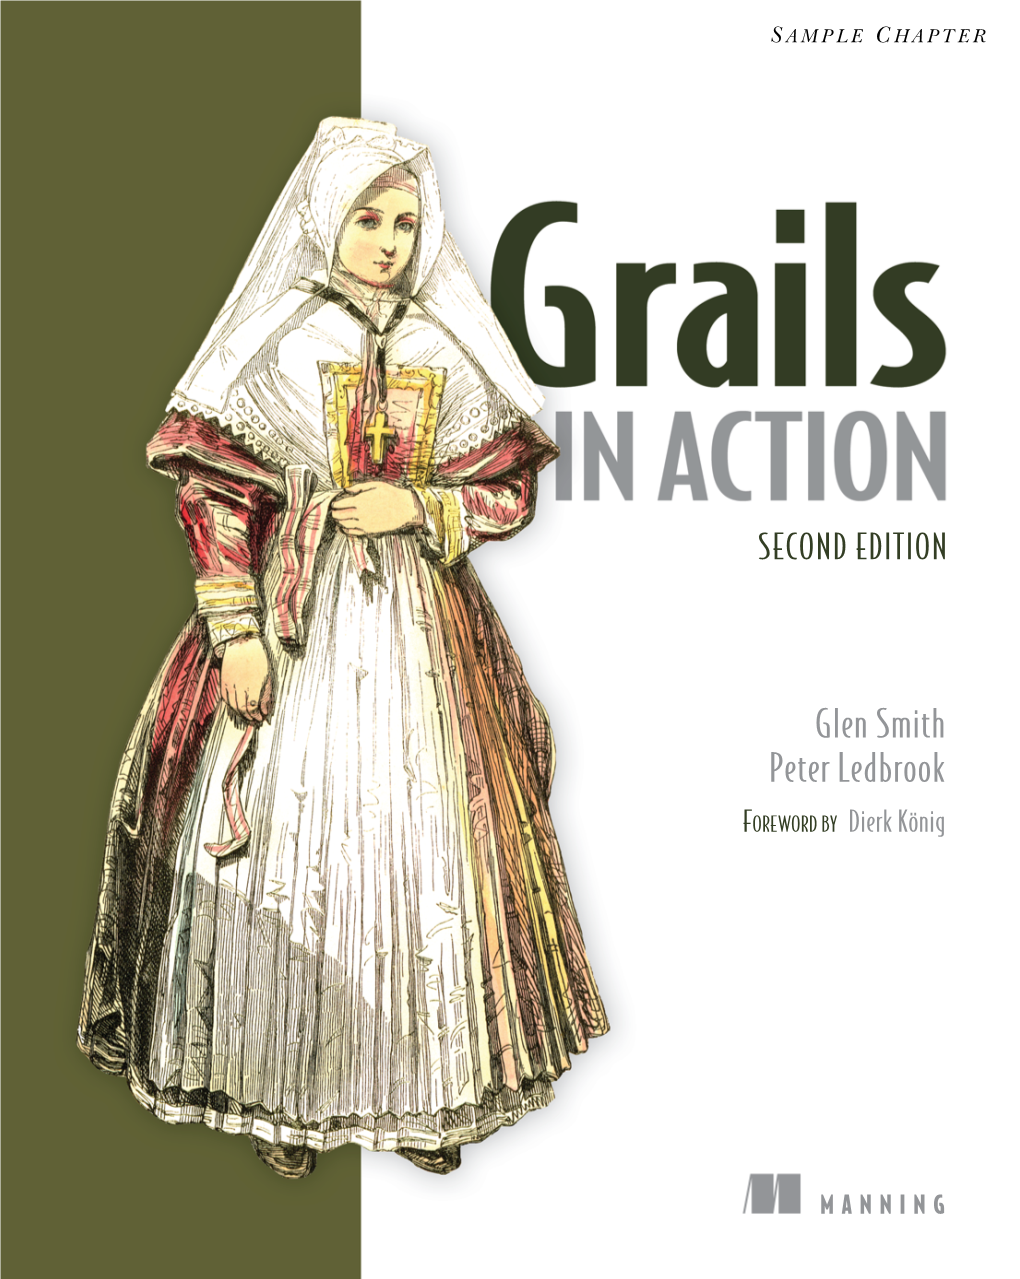 Grails in Action, Second Edition by Glen Smith Peter Ledbrook